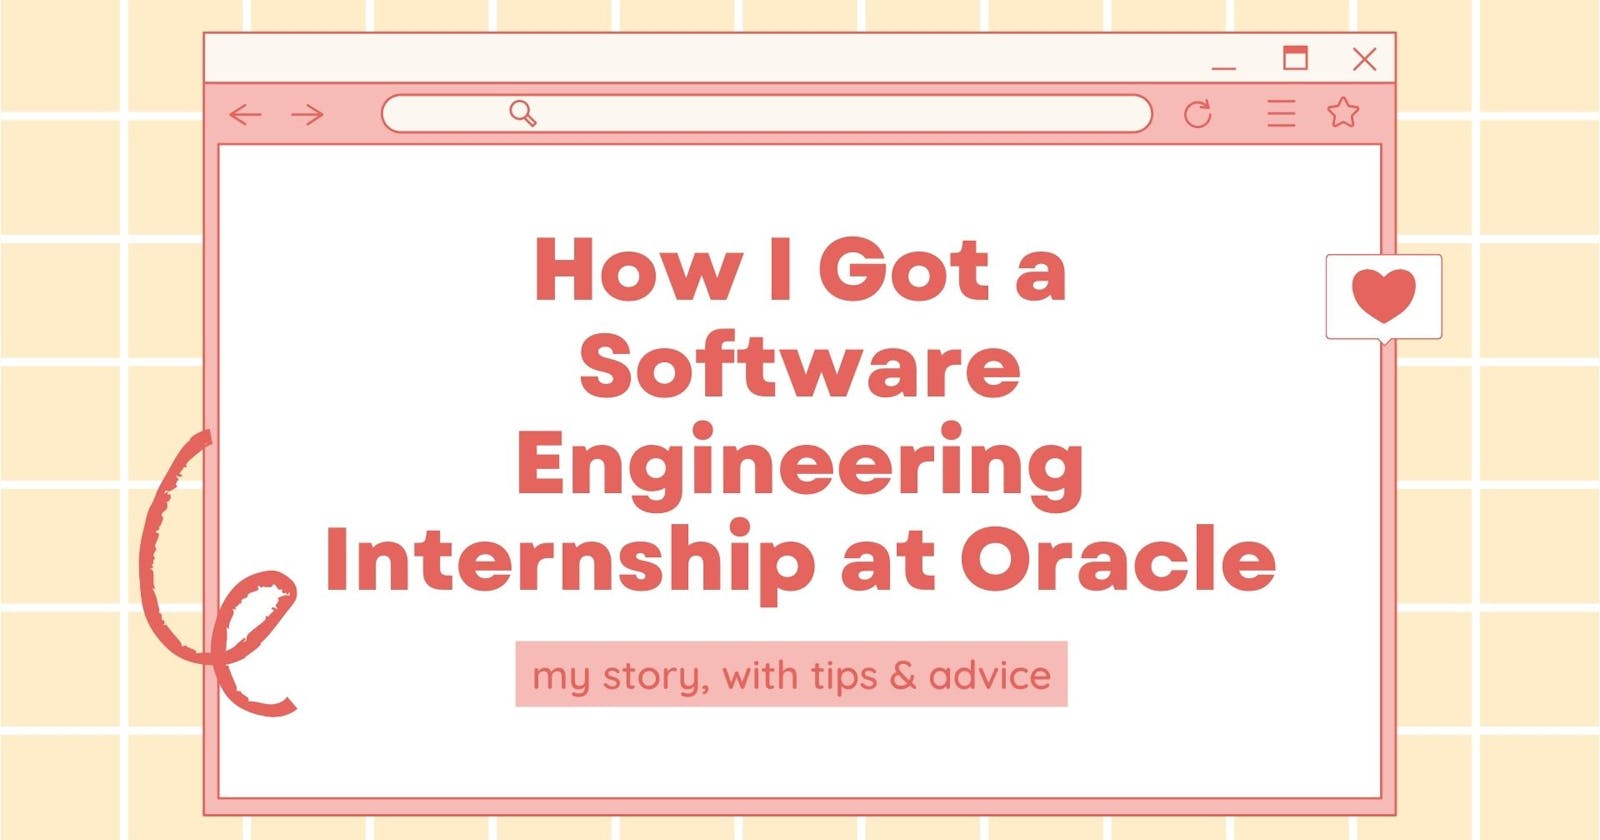 Cover Image for I got a Paid Software Engineering Internship at Oracle. My Story & Advice